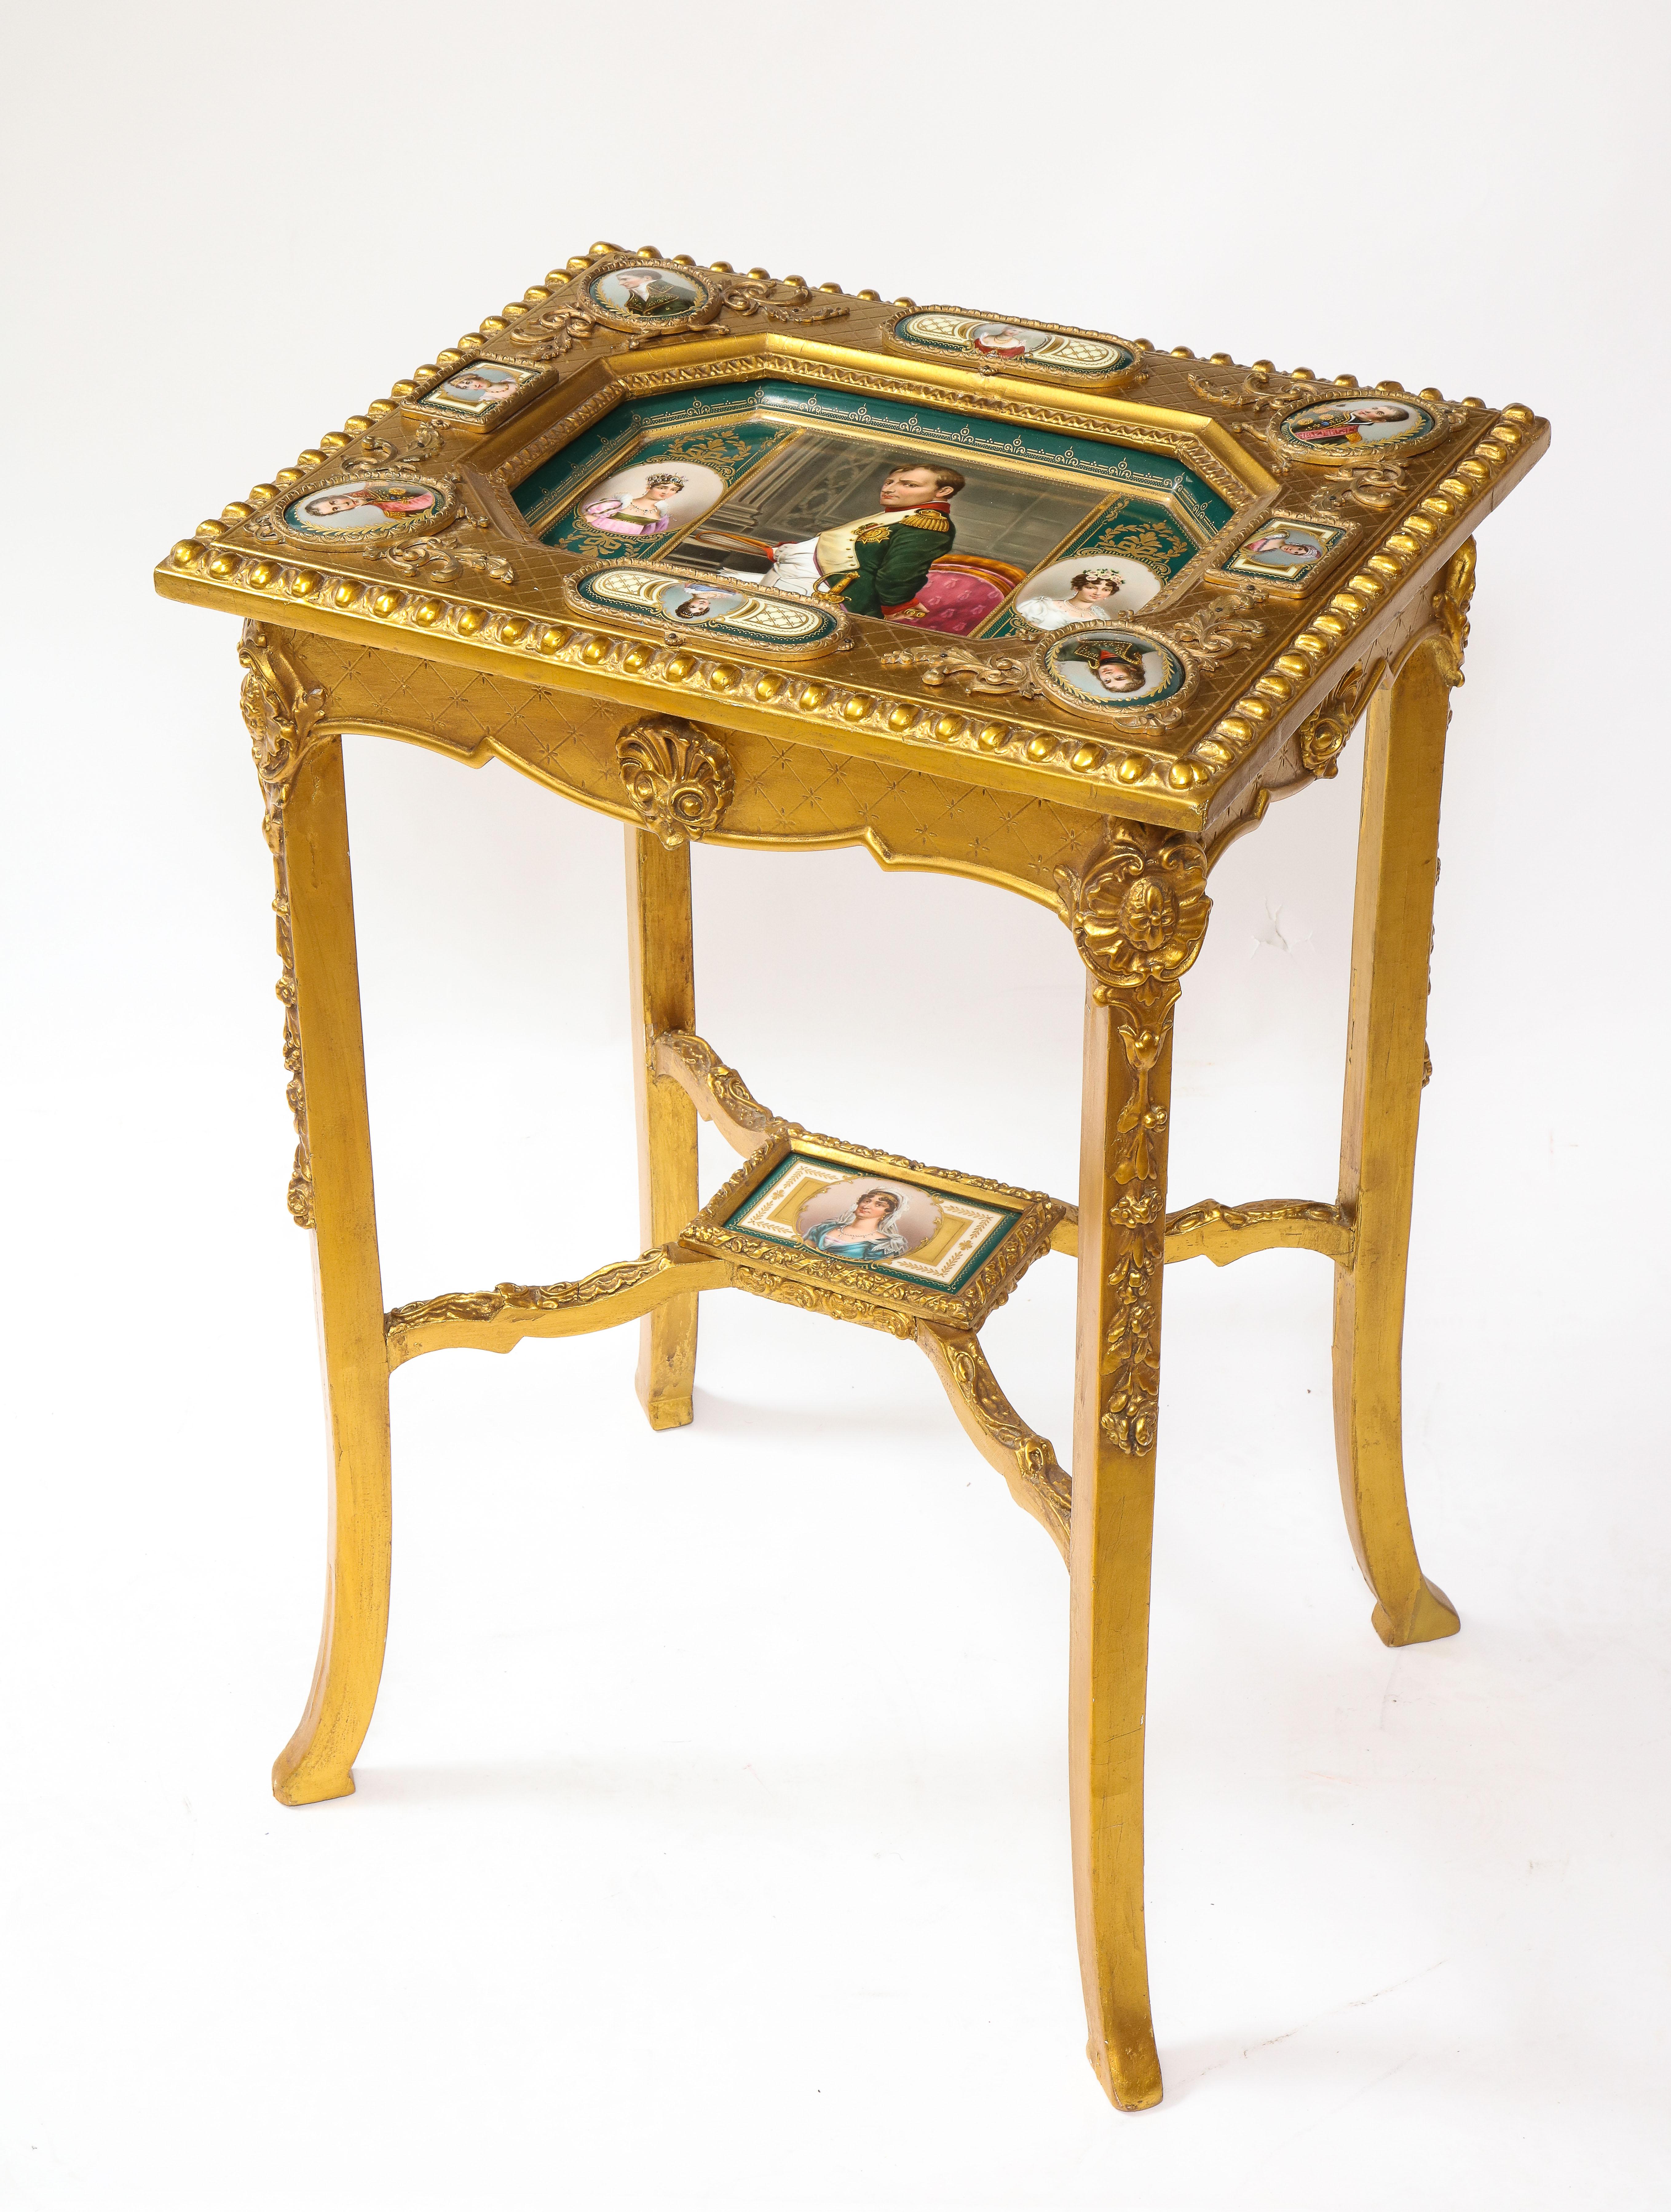 A fabulous 19th century Louis XVI style giltwood napoleonic side table with hand-painted inlaid Royal Vienna Porcelain plaques. Gorgeously finished in 24K, this exquisite side table is complete with inlaid porcelain plaques with a large center